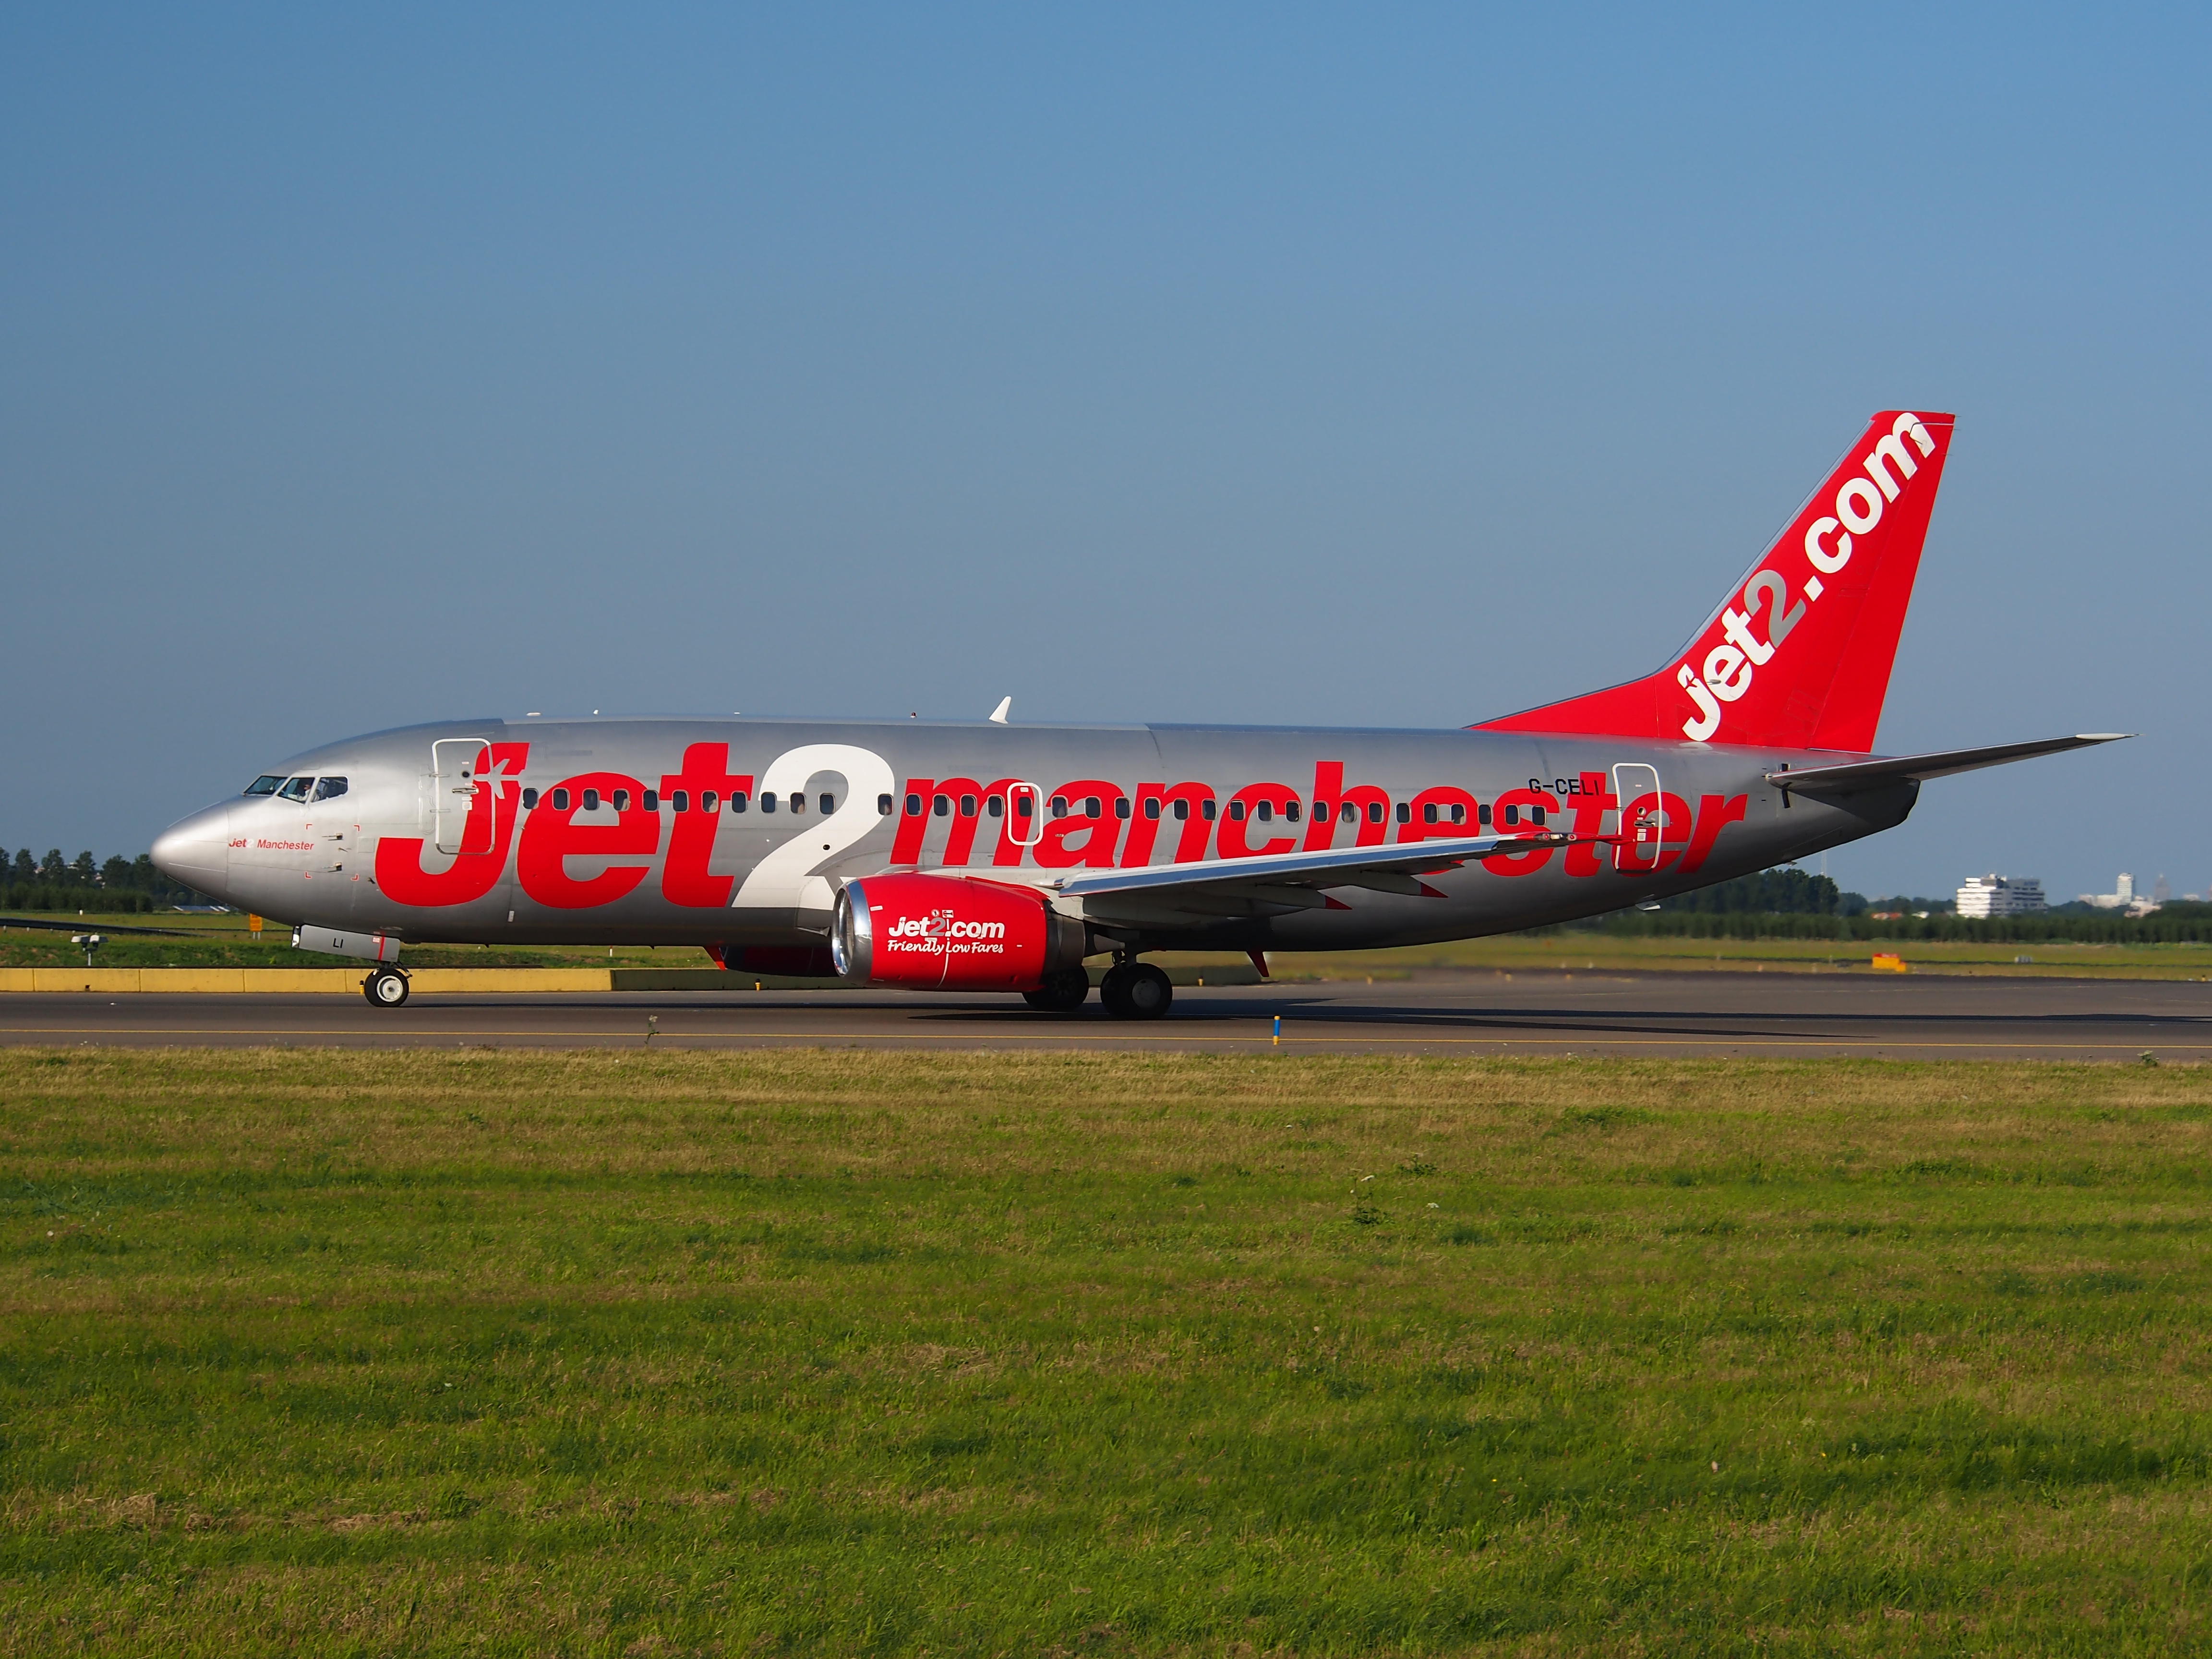 G-CELI Jet2 Boeing 737-330 - cn 23526 taxiing 18july2013 pic-005